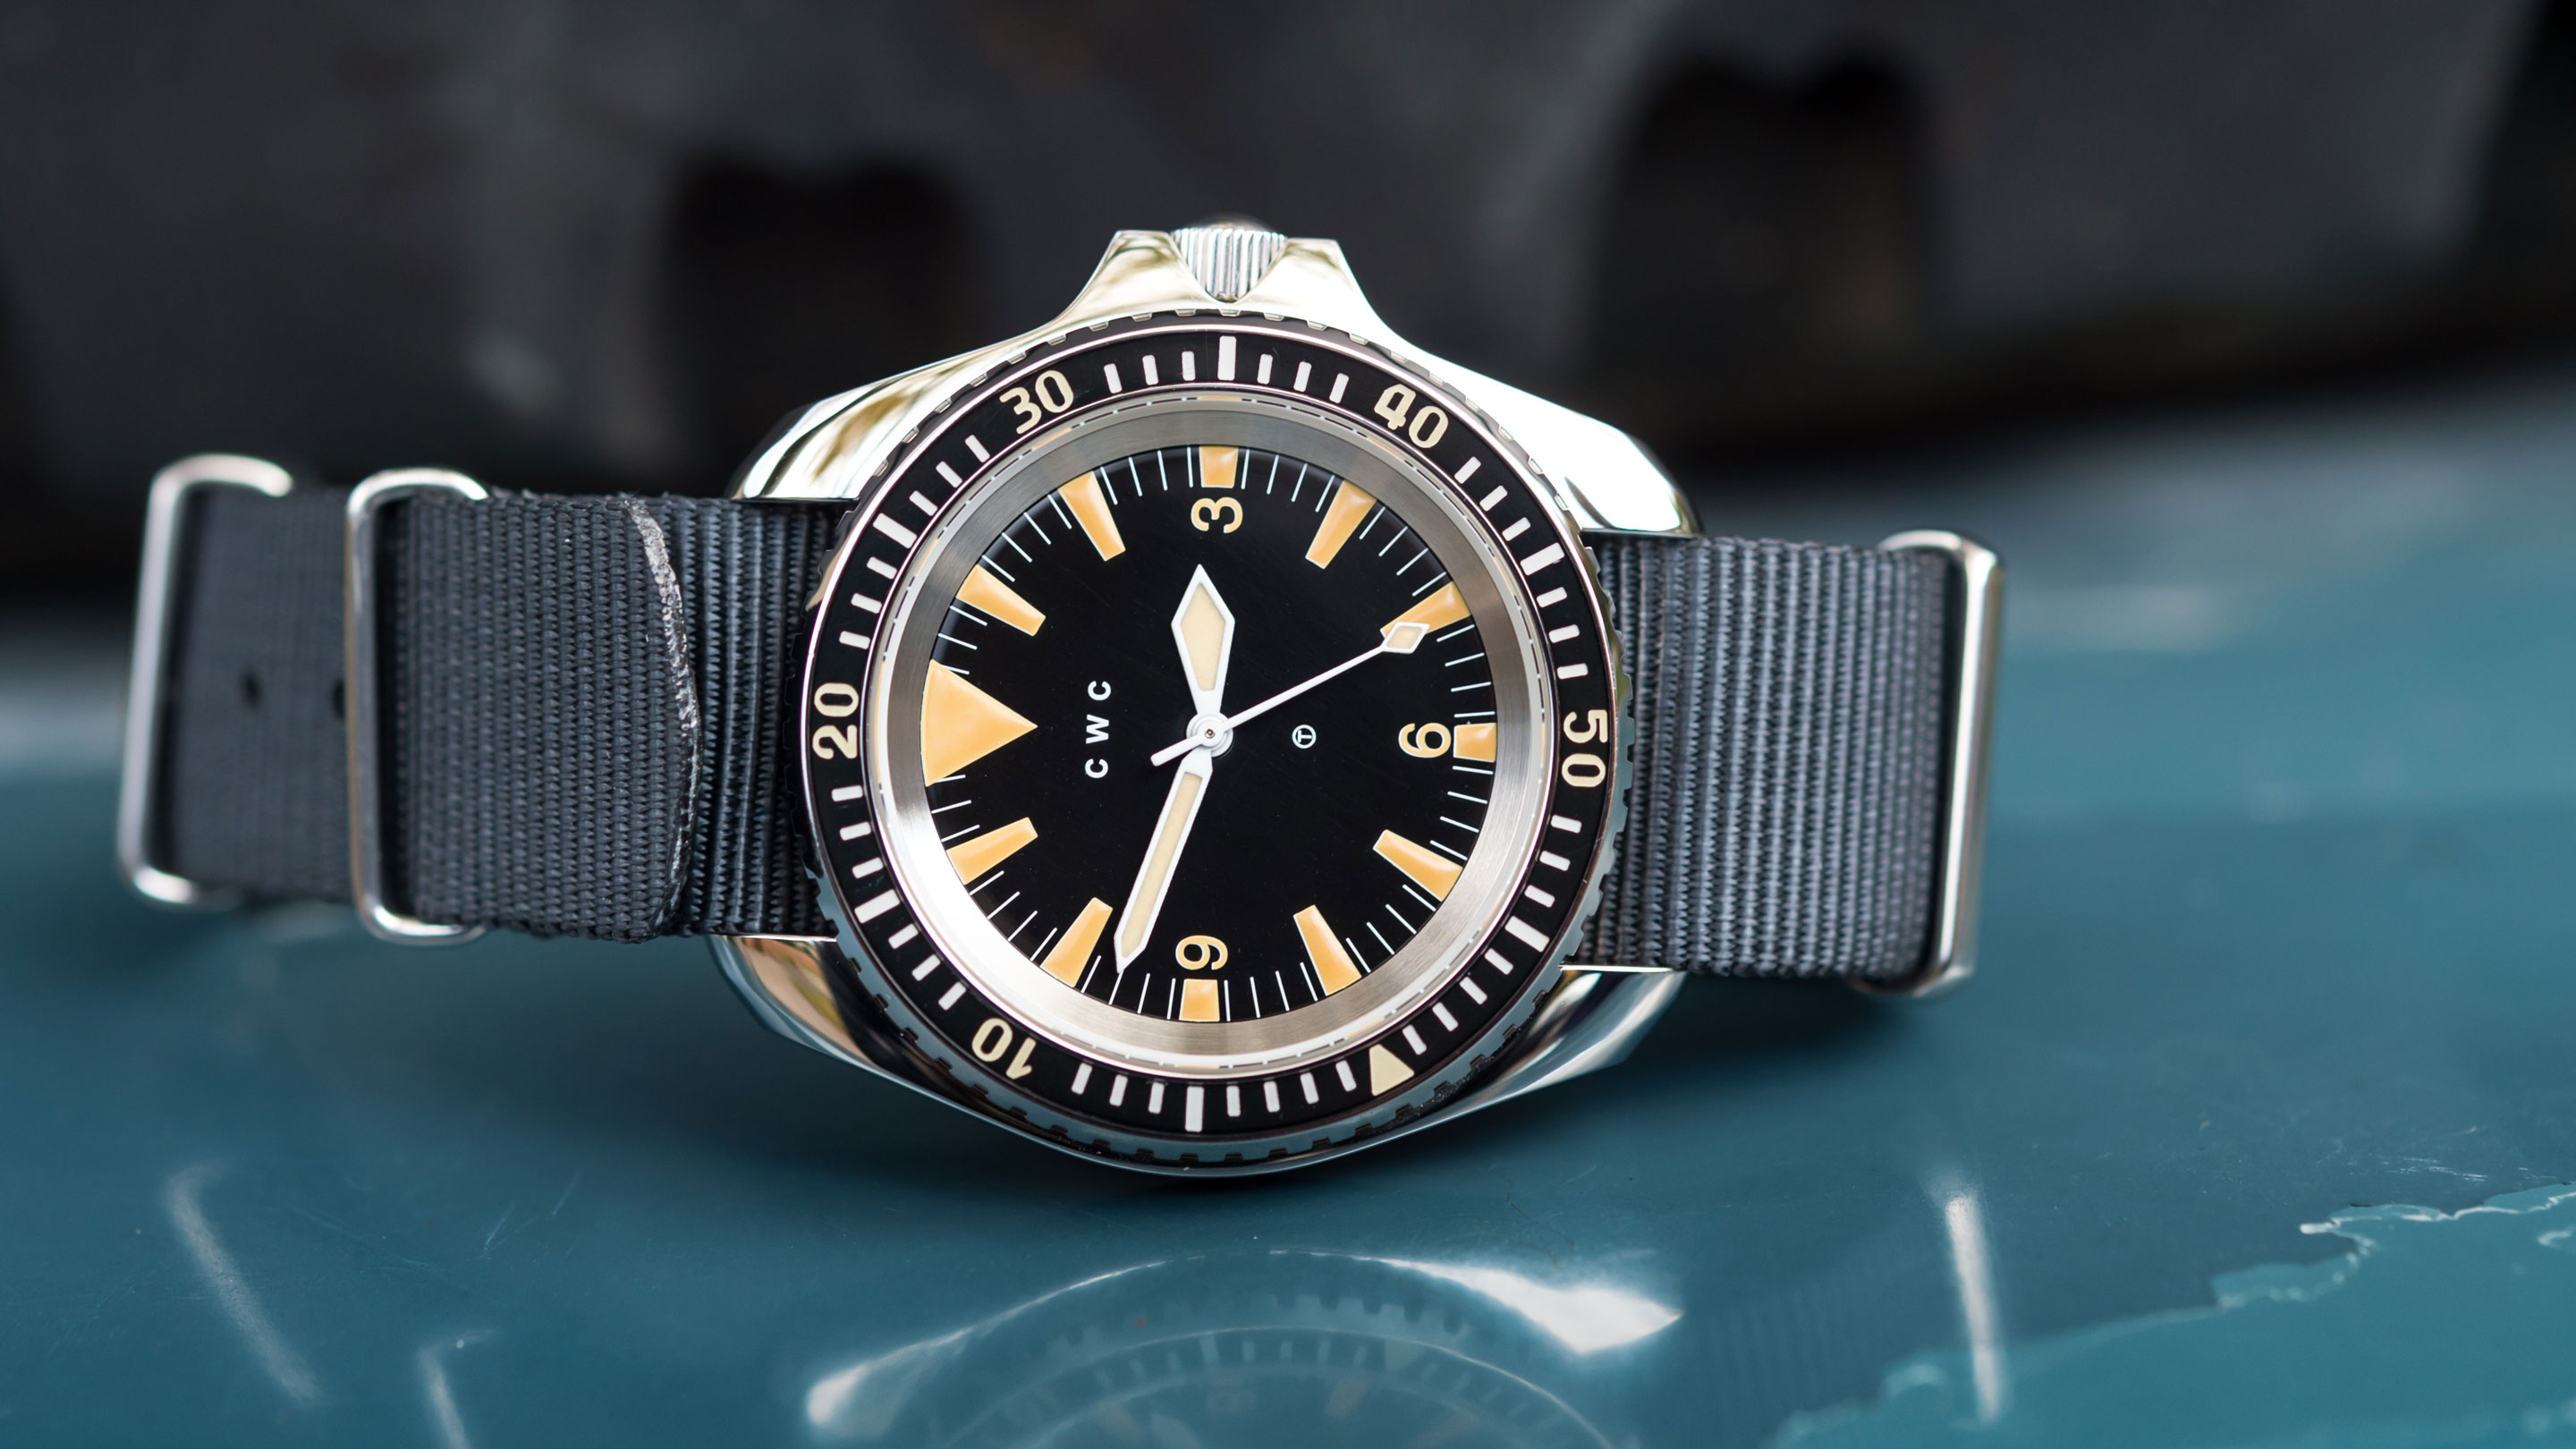 Hands-On: The CWC 1980 Royal Navy Diver Re-Issue - Hodinkee